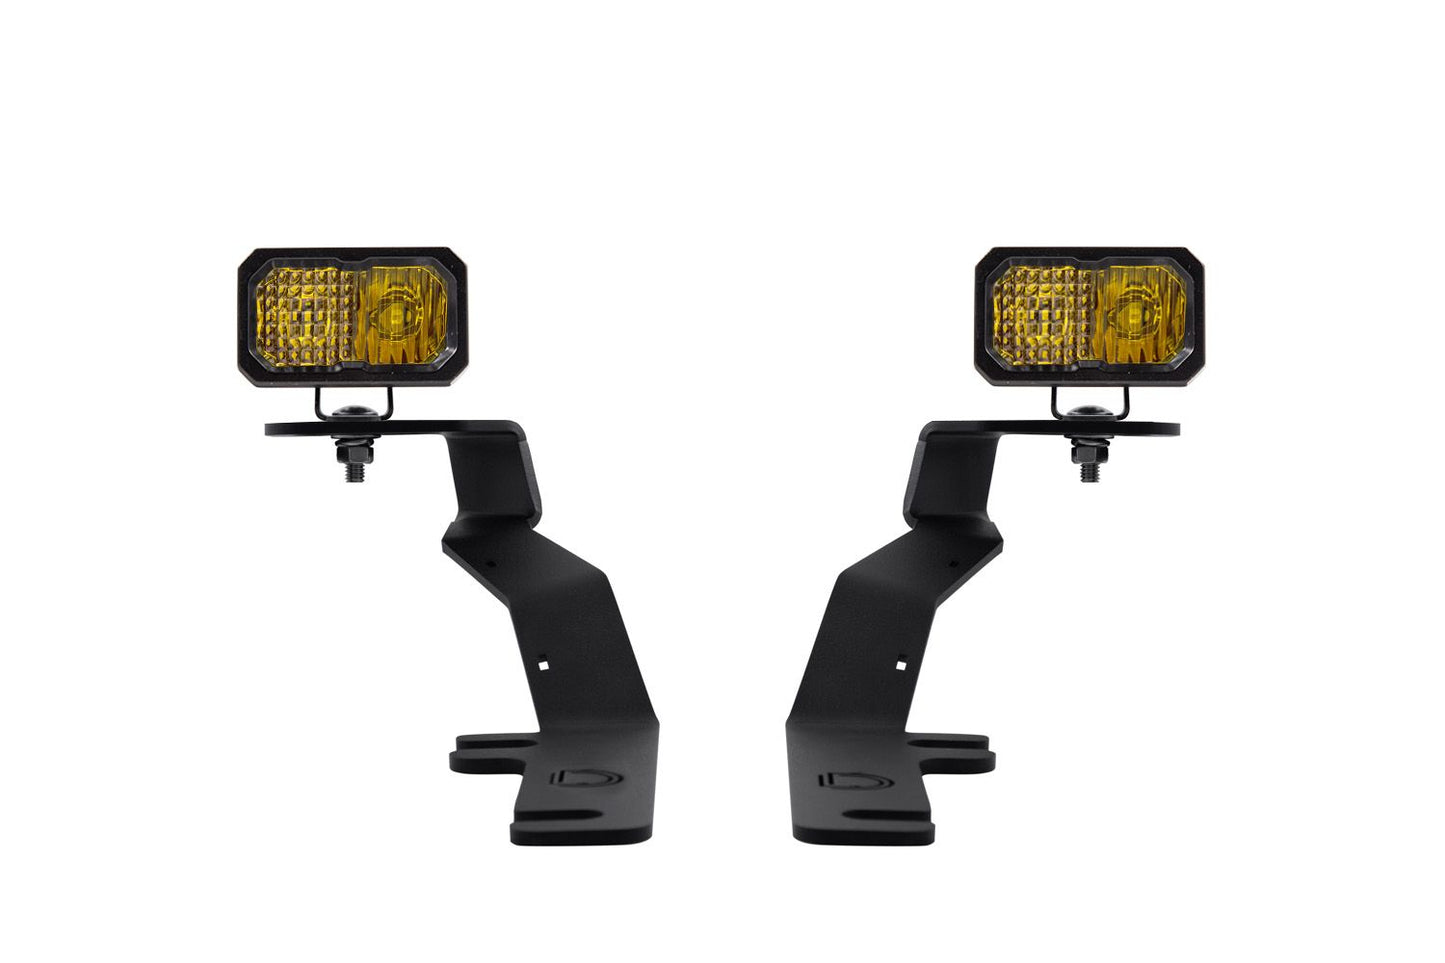 Stage Series Backlit Ditch Light Kit for 2017-2020 Ford Raptor (Yellow Combo)